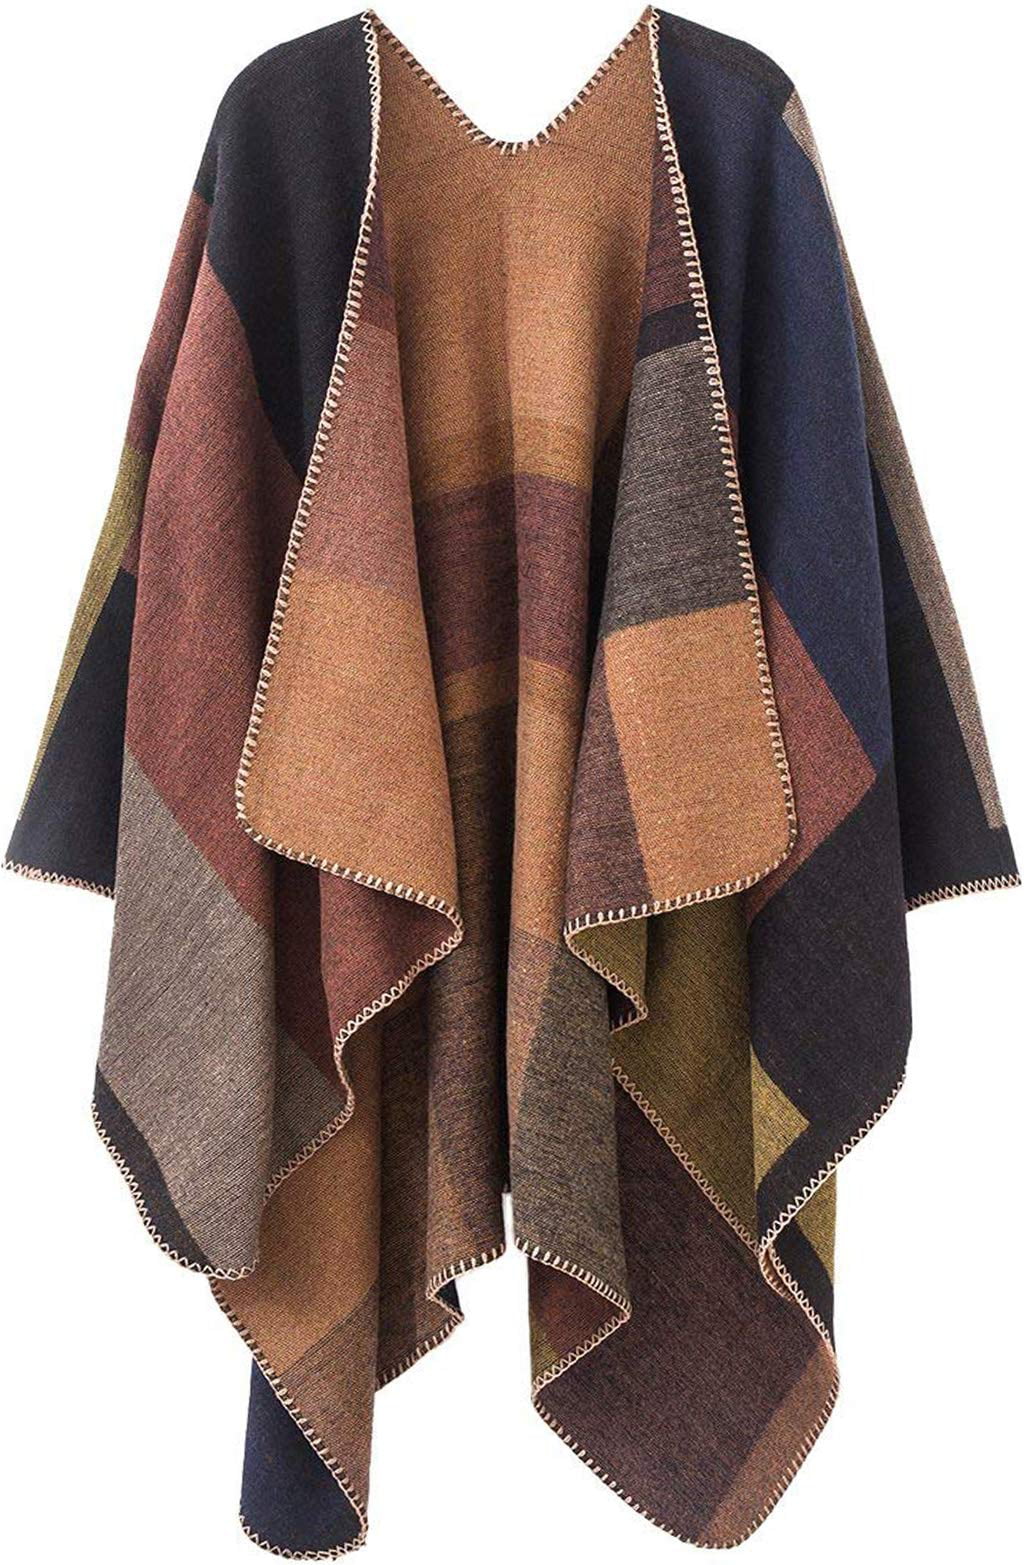 Women's Plaid Sweater Poncho Cape Coat Open Front Blanket Shawls and Wraps,  Colorblock Khaki, Valentines Day Gifts for Her - Walmart.com